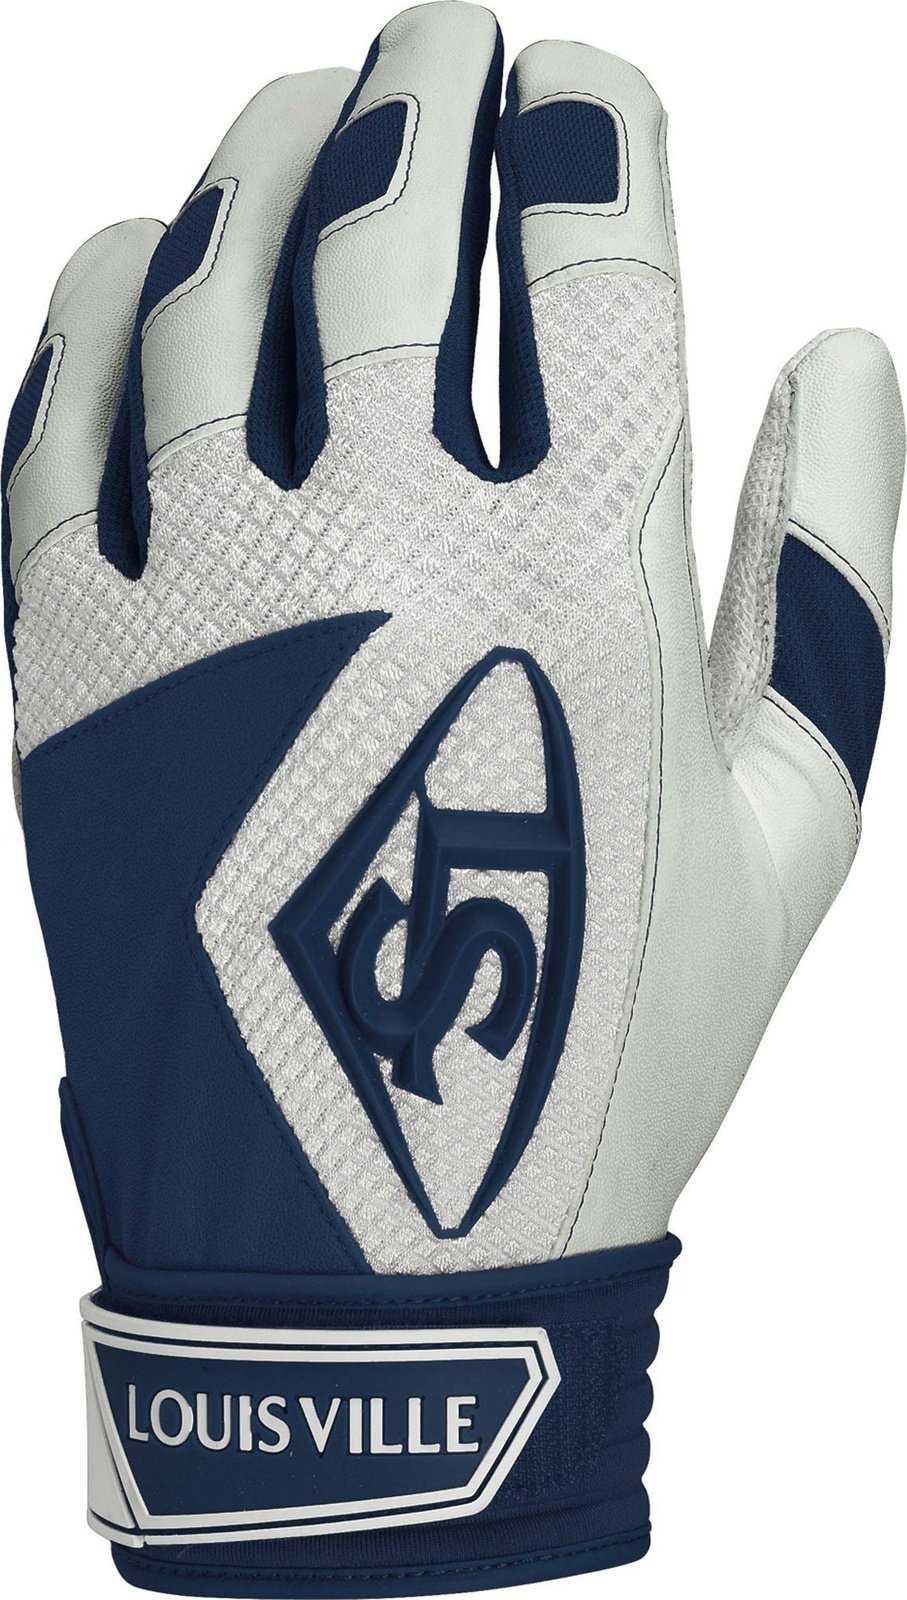 Louisville Slugger Series 7 Youth Batting Gloves - Navy - HIT A Double